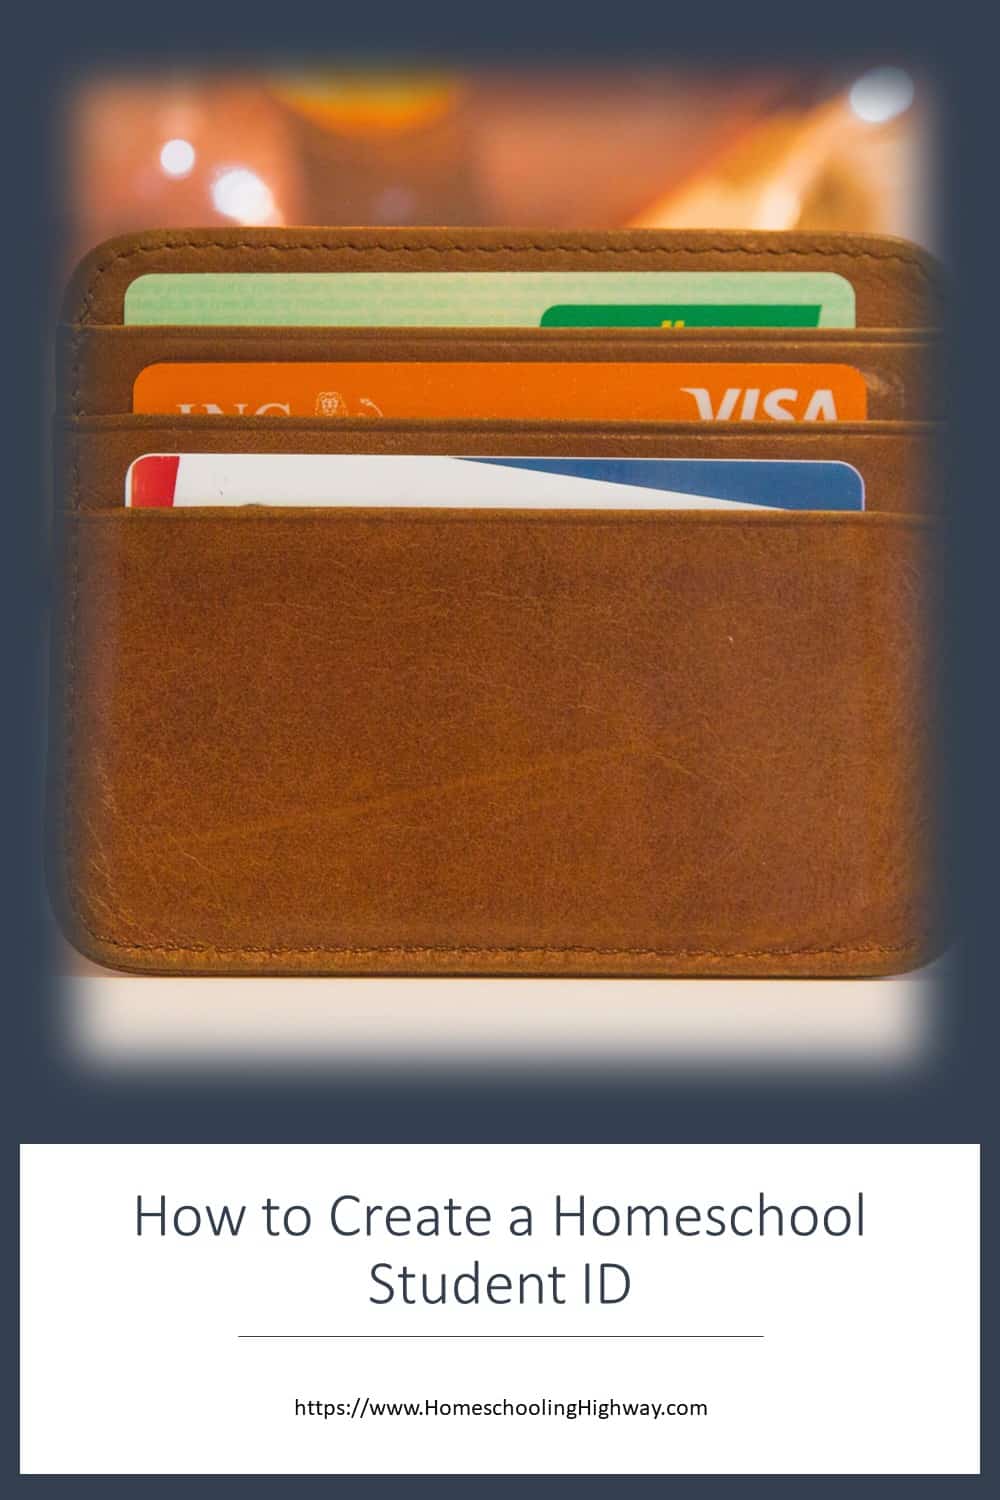 Learn how to easily create a professional looking homeschool student's identification card with Microsoft Word. By Homeschooling Highway